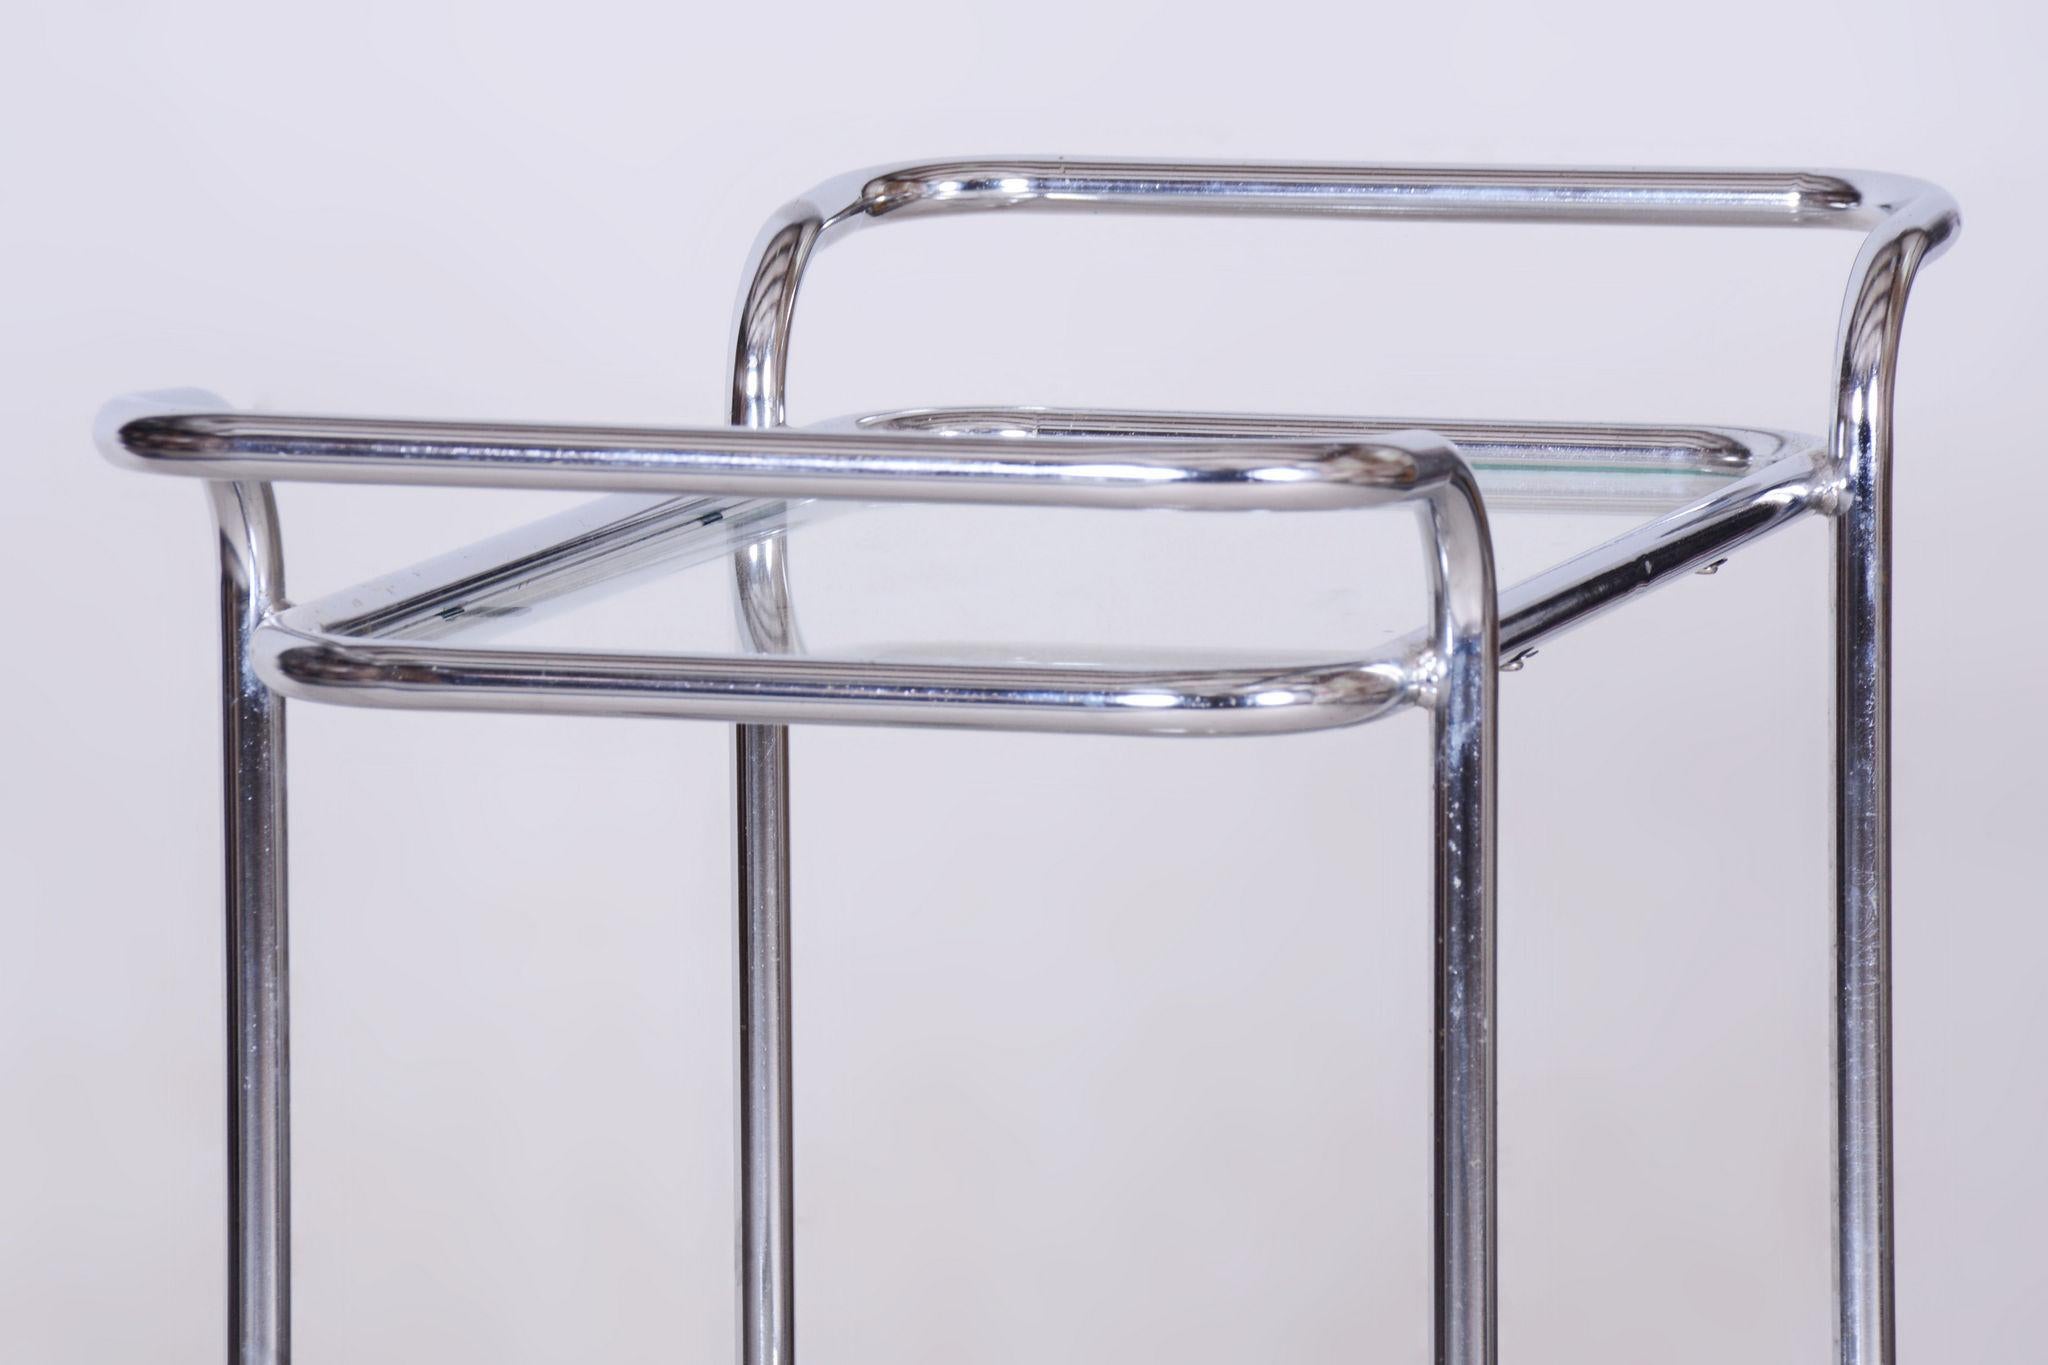 Original Bauhaus Trolley, Chrome-Plated Steel, Glass, Germany, 1940s For Sale 4